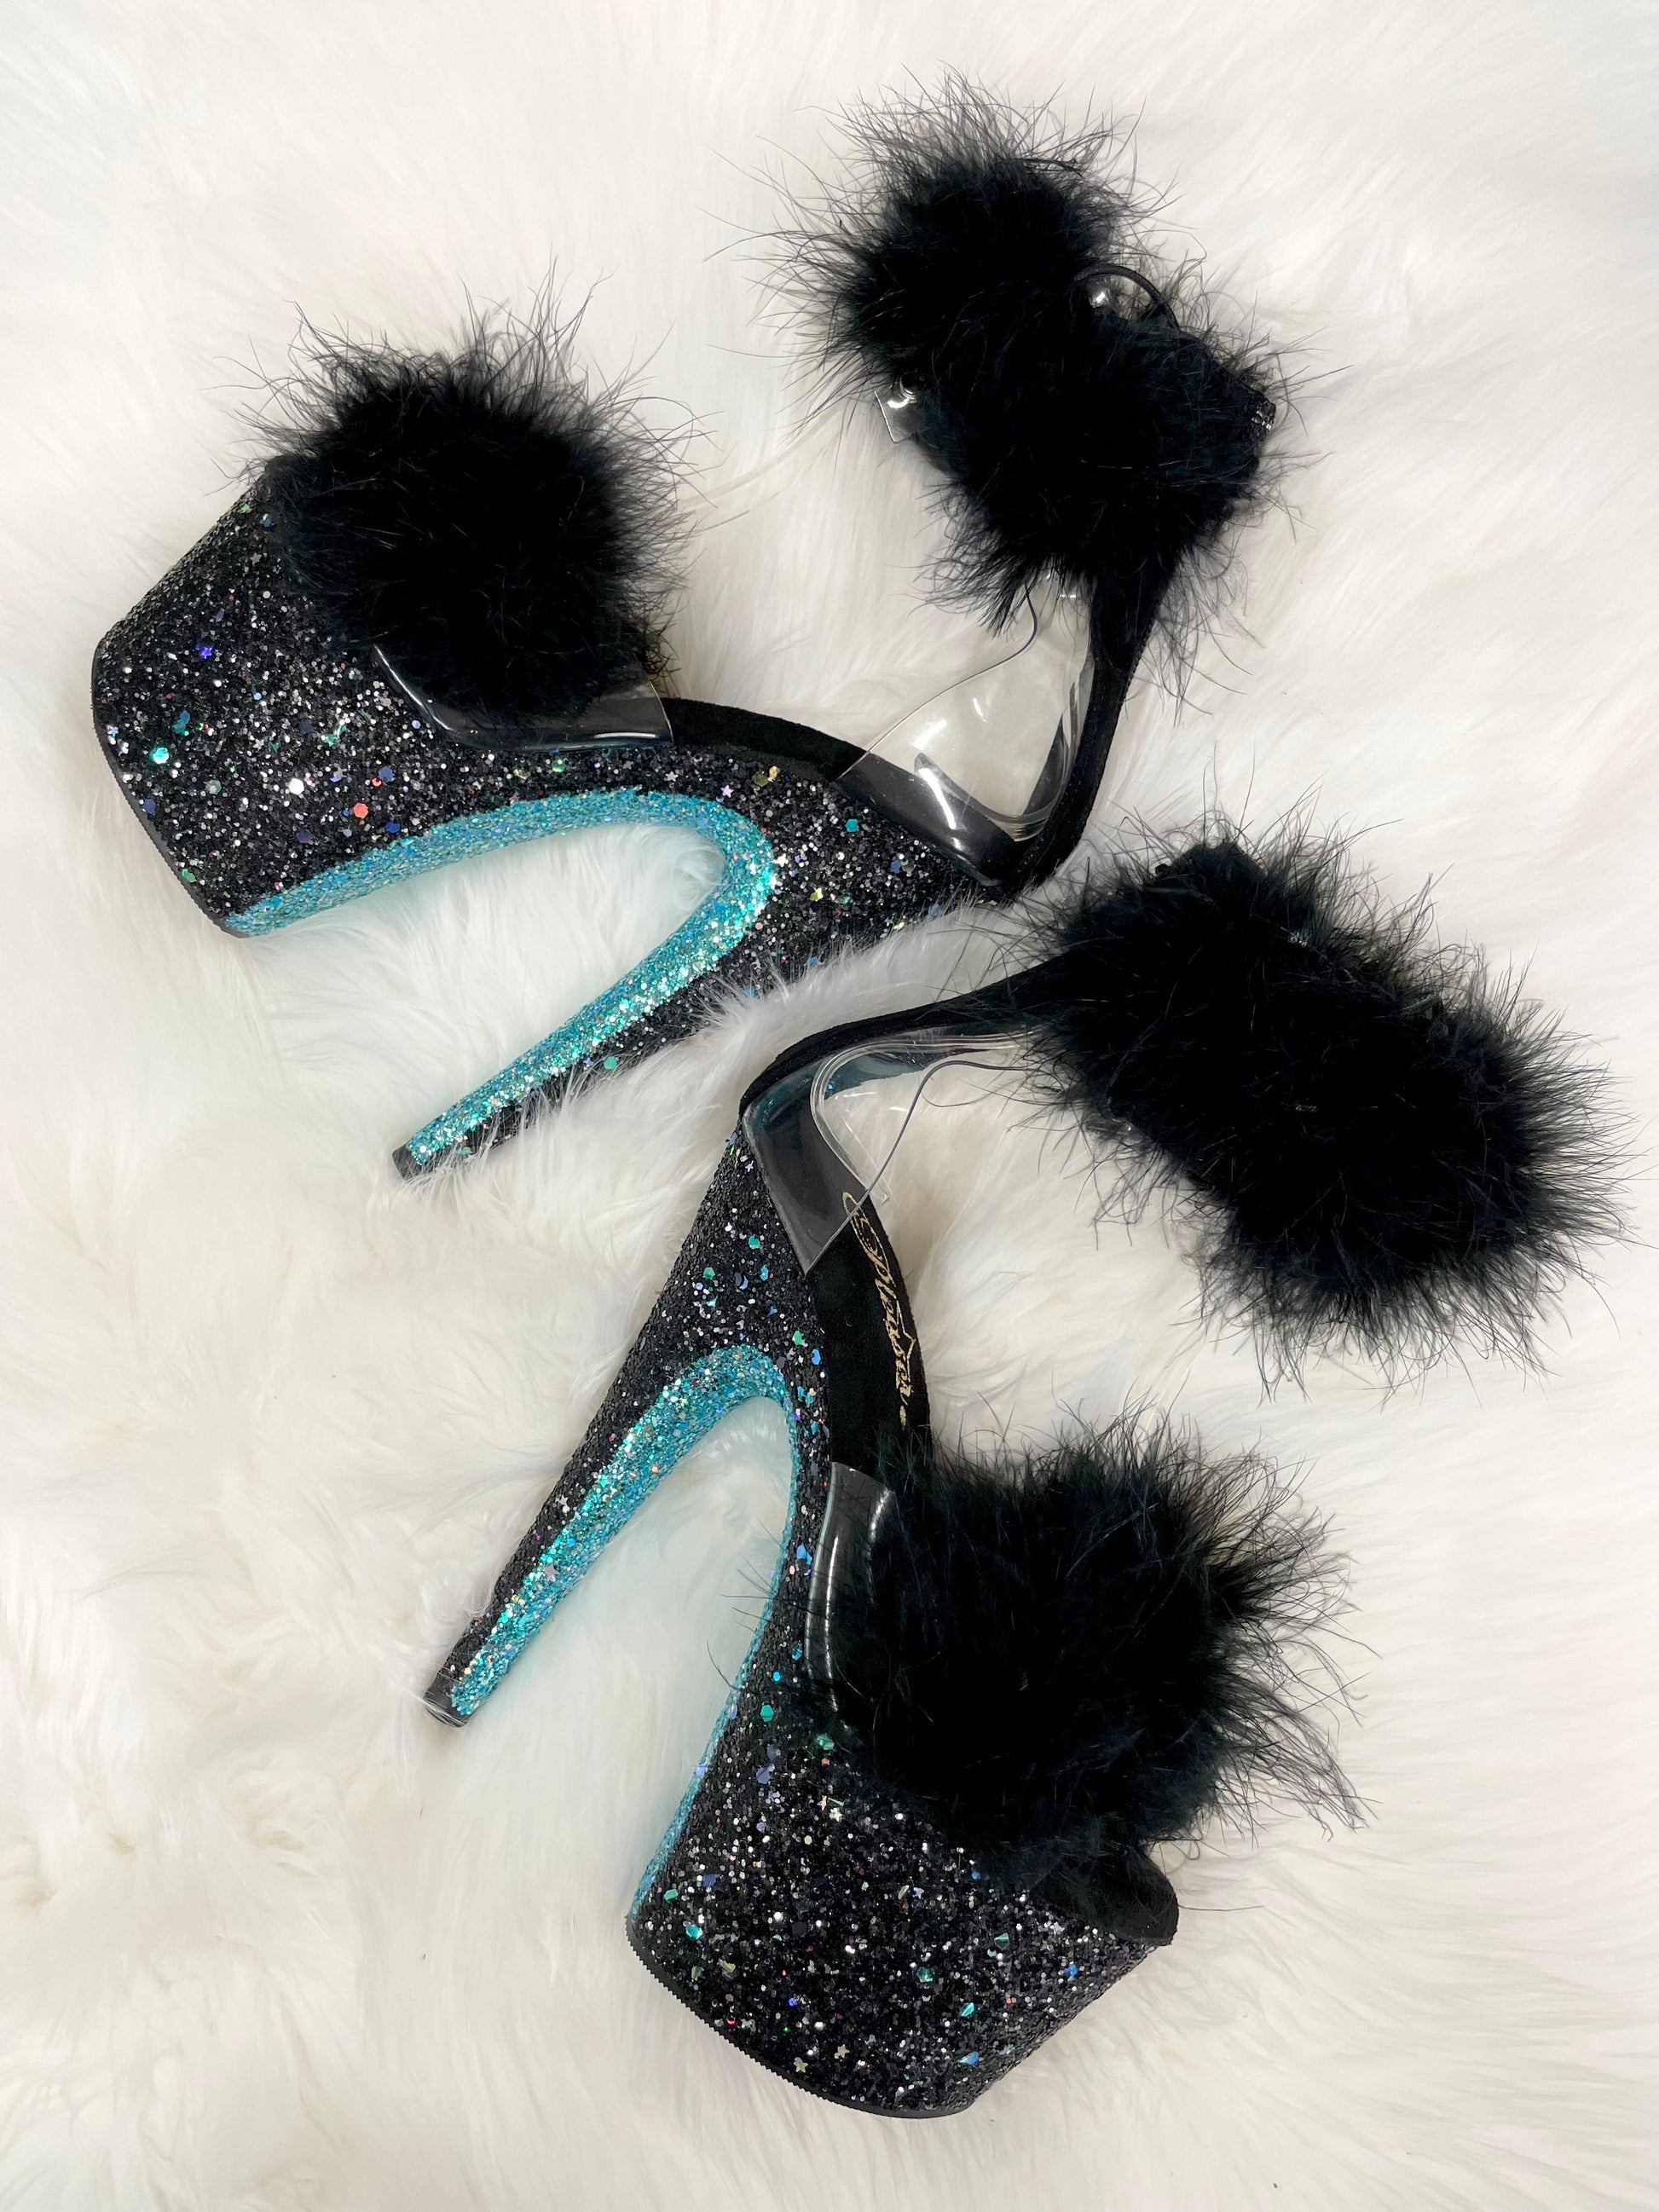 Black and baby blue glitter 7" Heels with baby blue glitter bottoms, and black glitter on the platform and heels, clear straps, black soles, black feathers over the toe straps, and black feathers around the ankle straps.